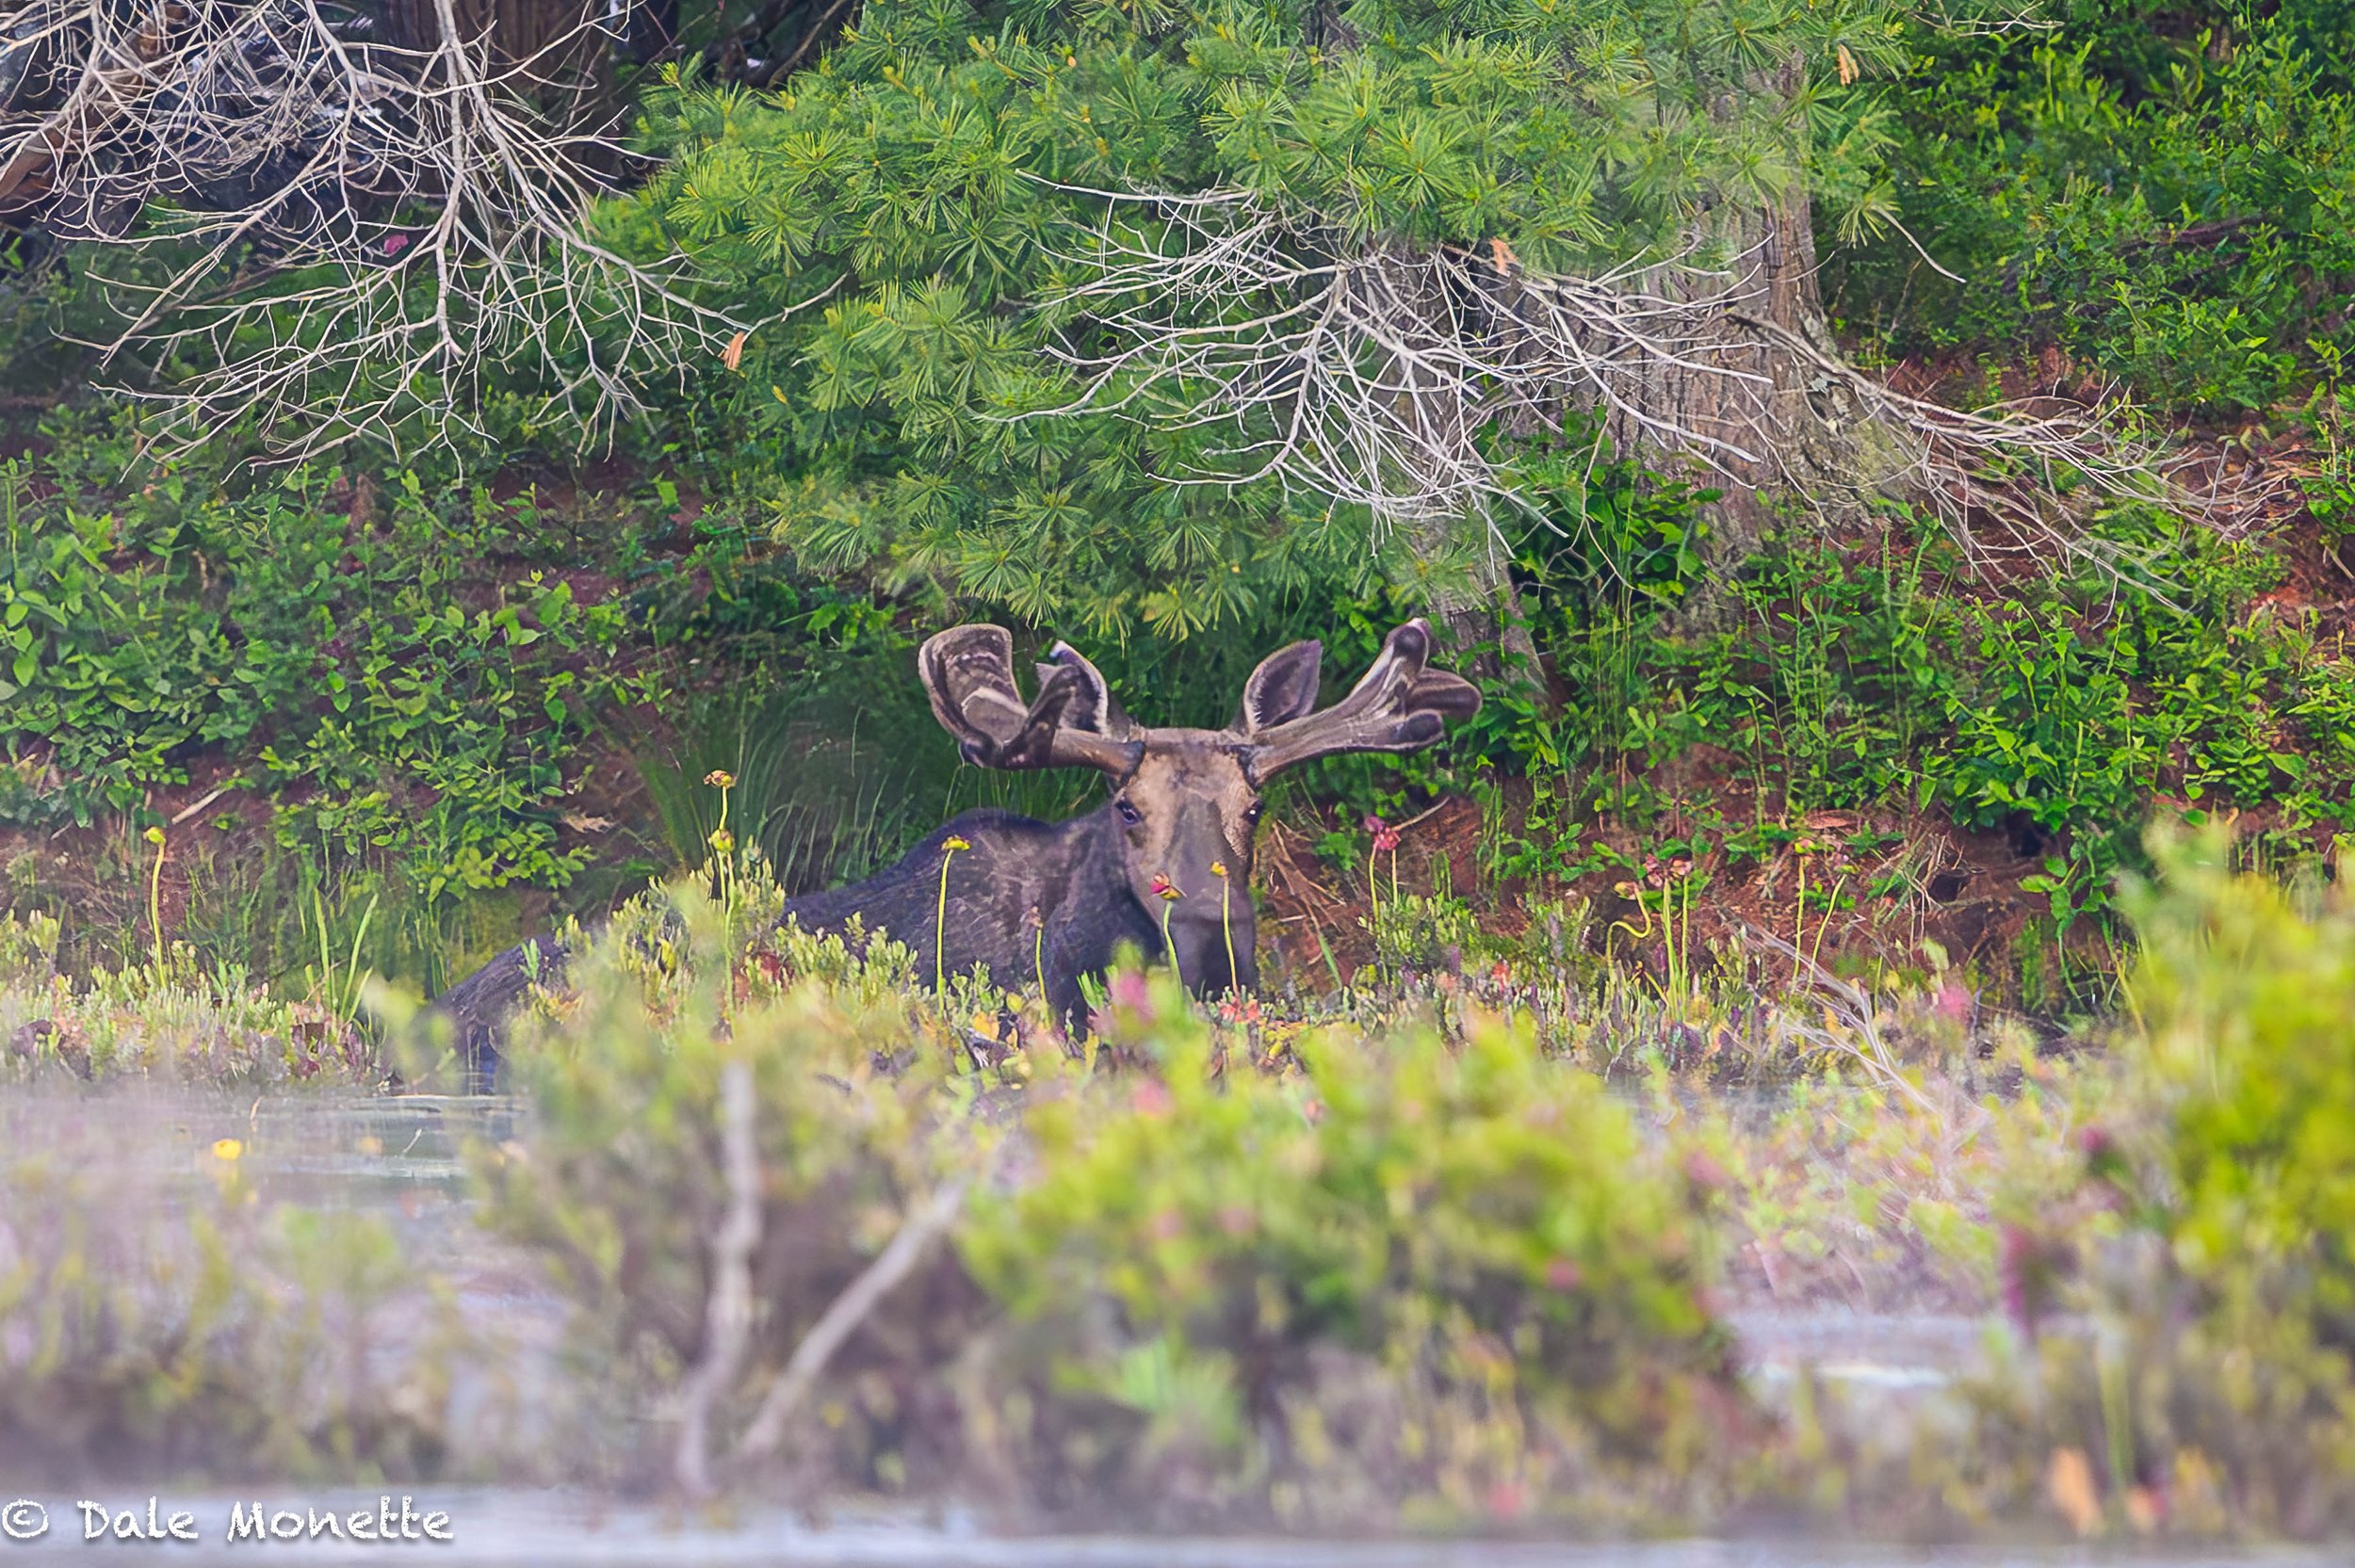   This moose I see year around. I can tell because he has a torn right ear looking like a question mark. He likes this particular pond to feed in every spring.  Note the pitcher plant buds growing in front of the moose.  